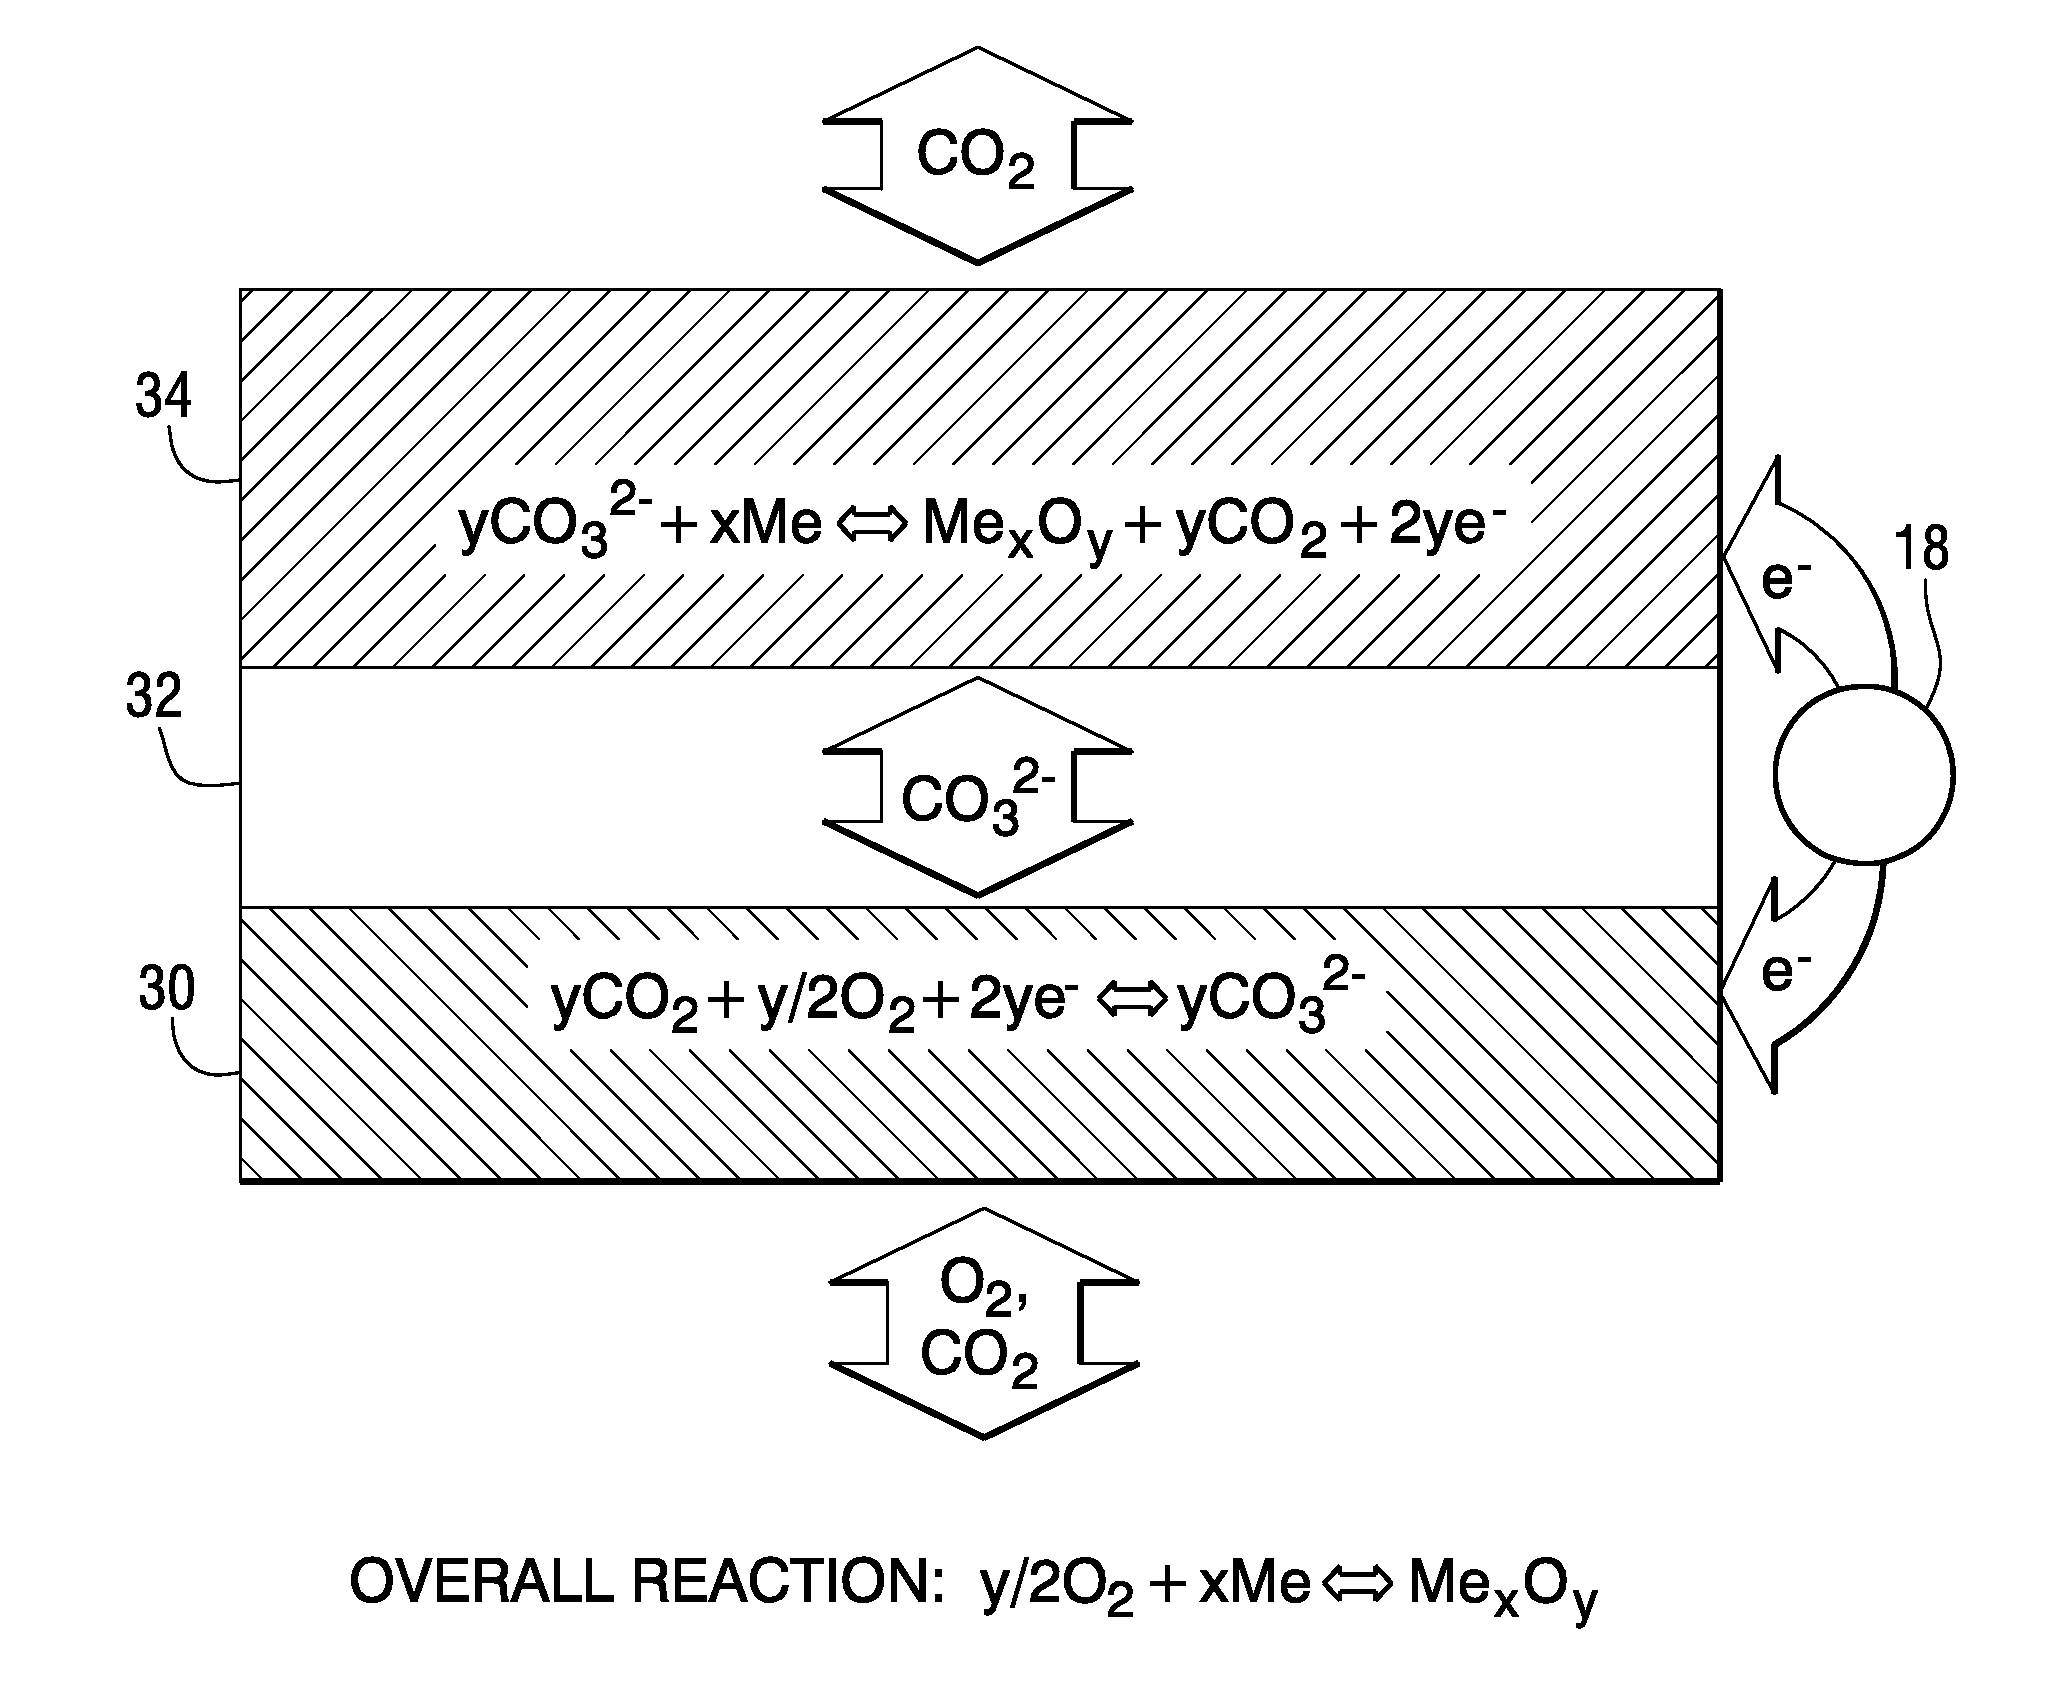 Rechargeable anion battery cell using a molten salt electrolyte